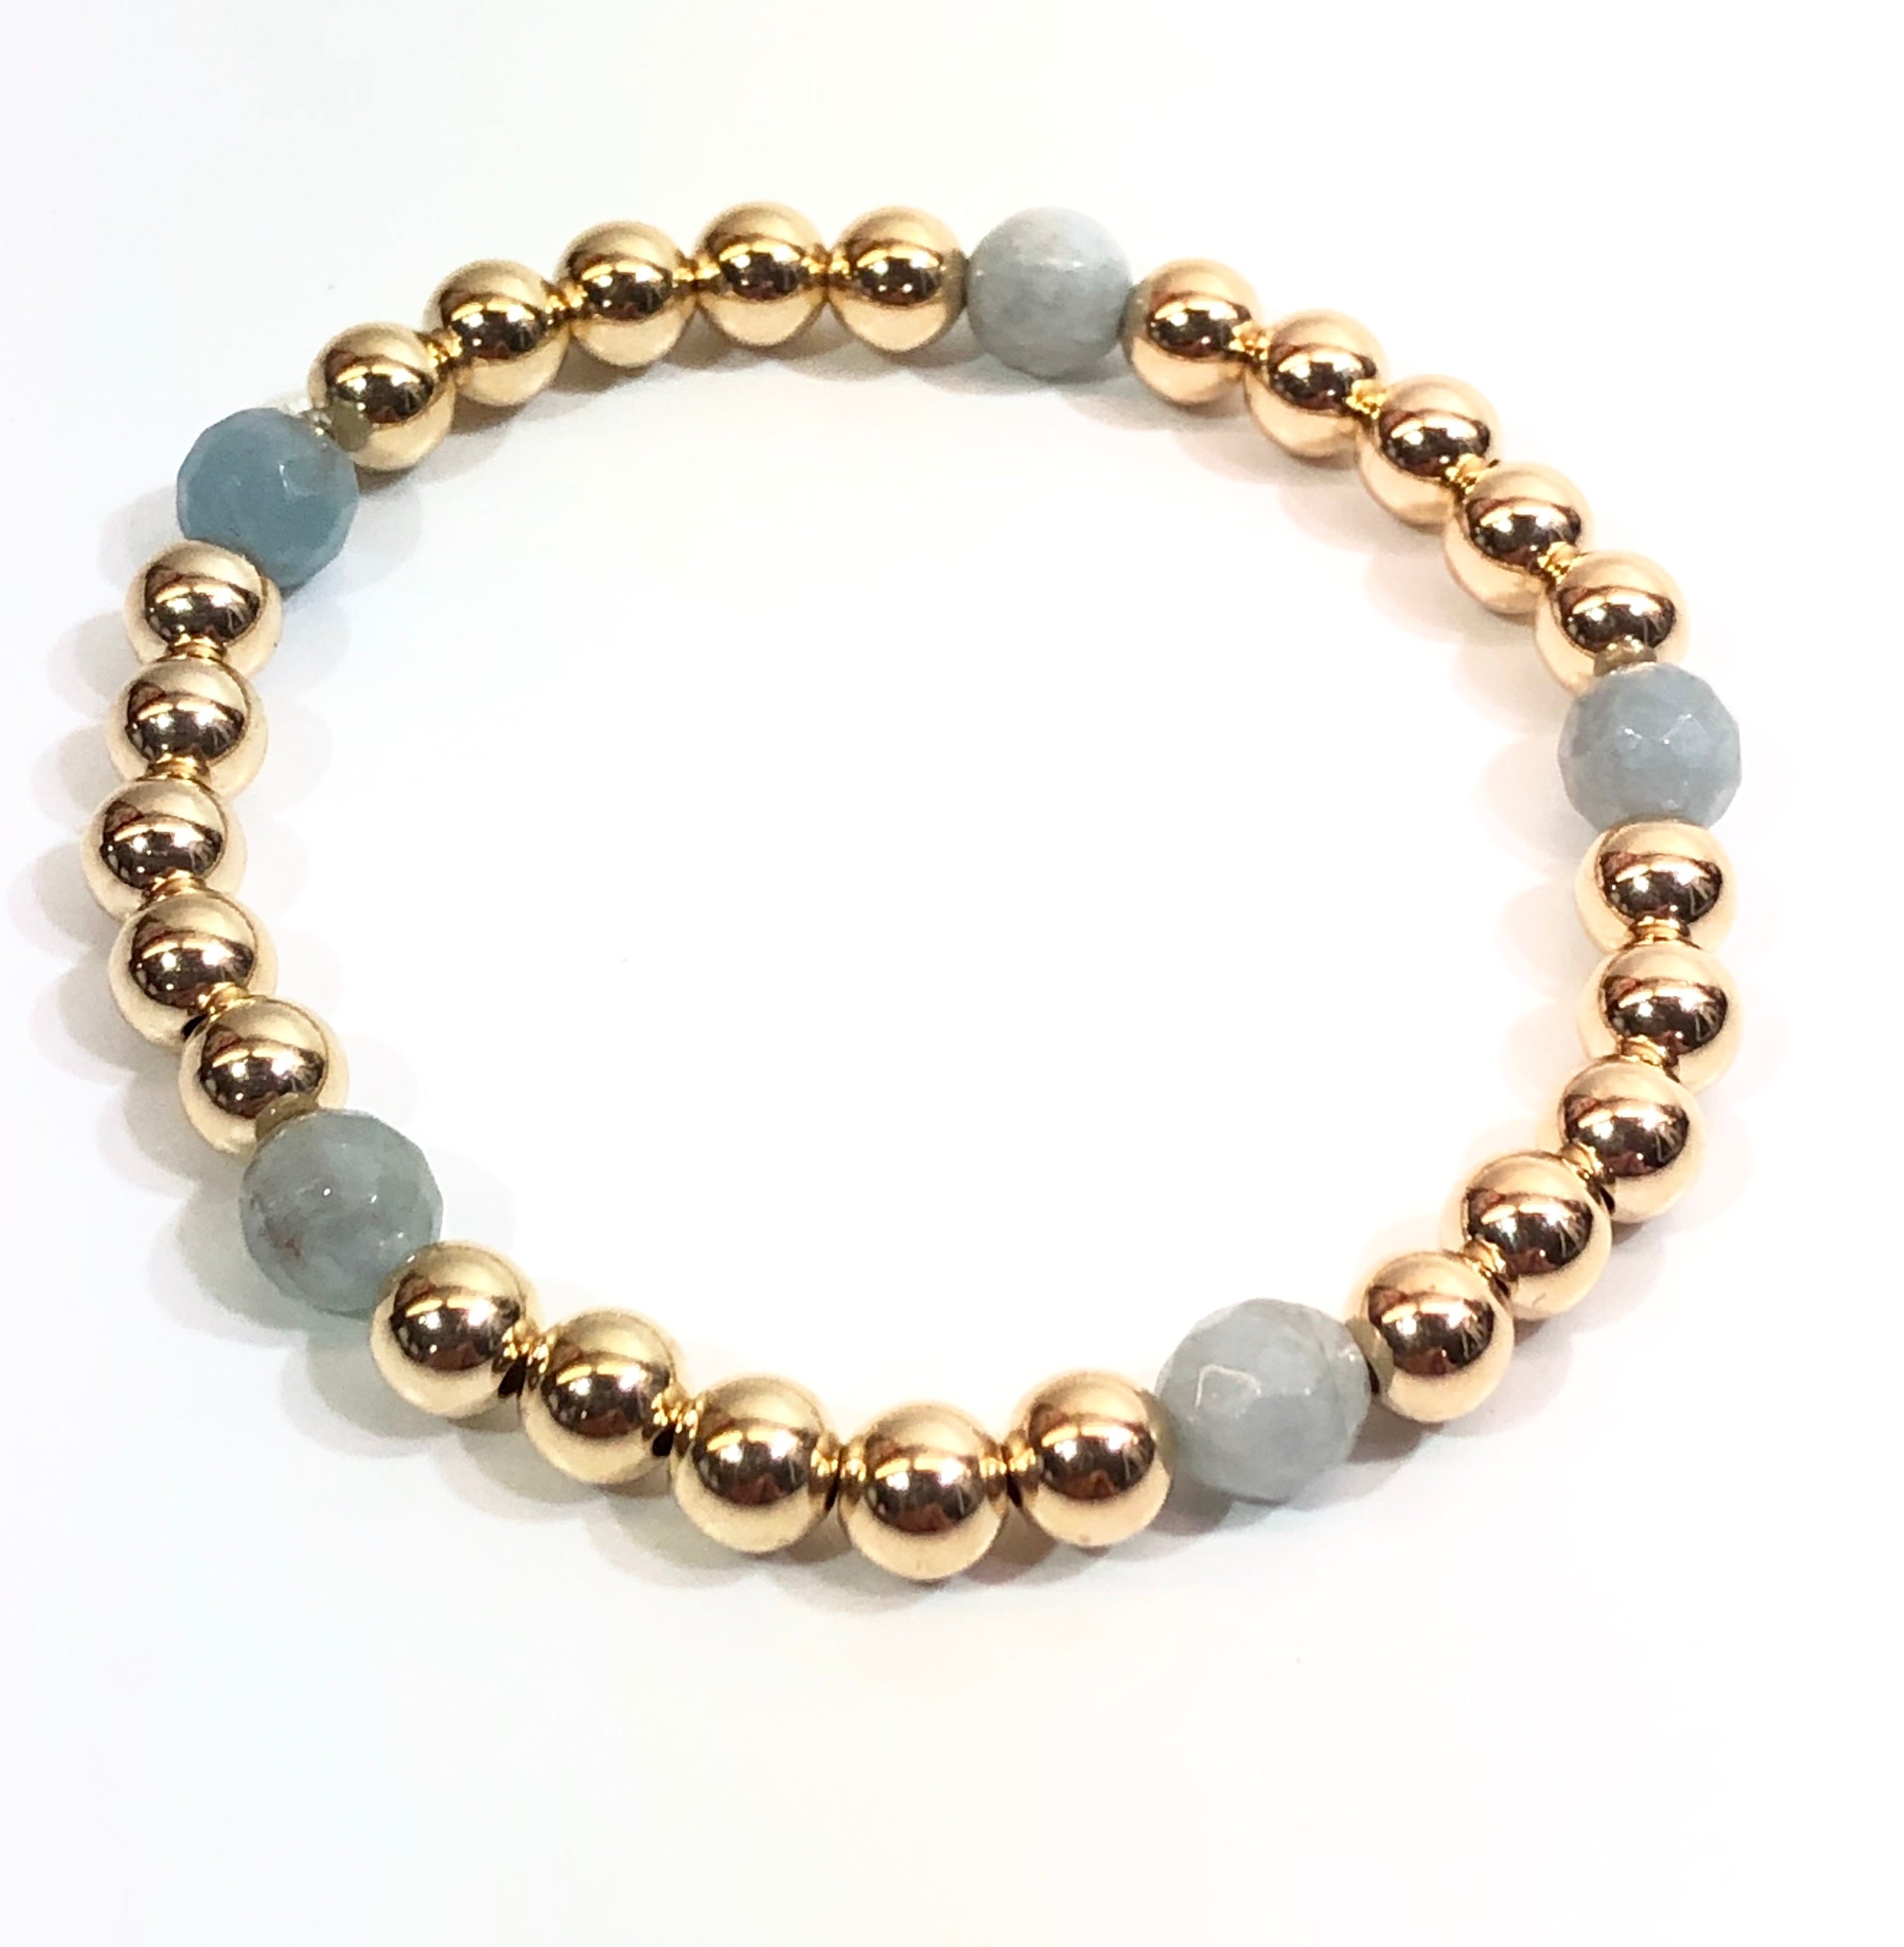 6mm 14kt Gold Filled Bead Bracelet with 5 Faceted 6mm Aquamarine Beads